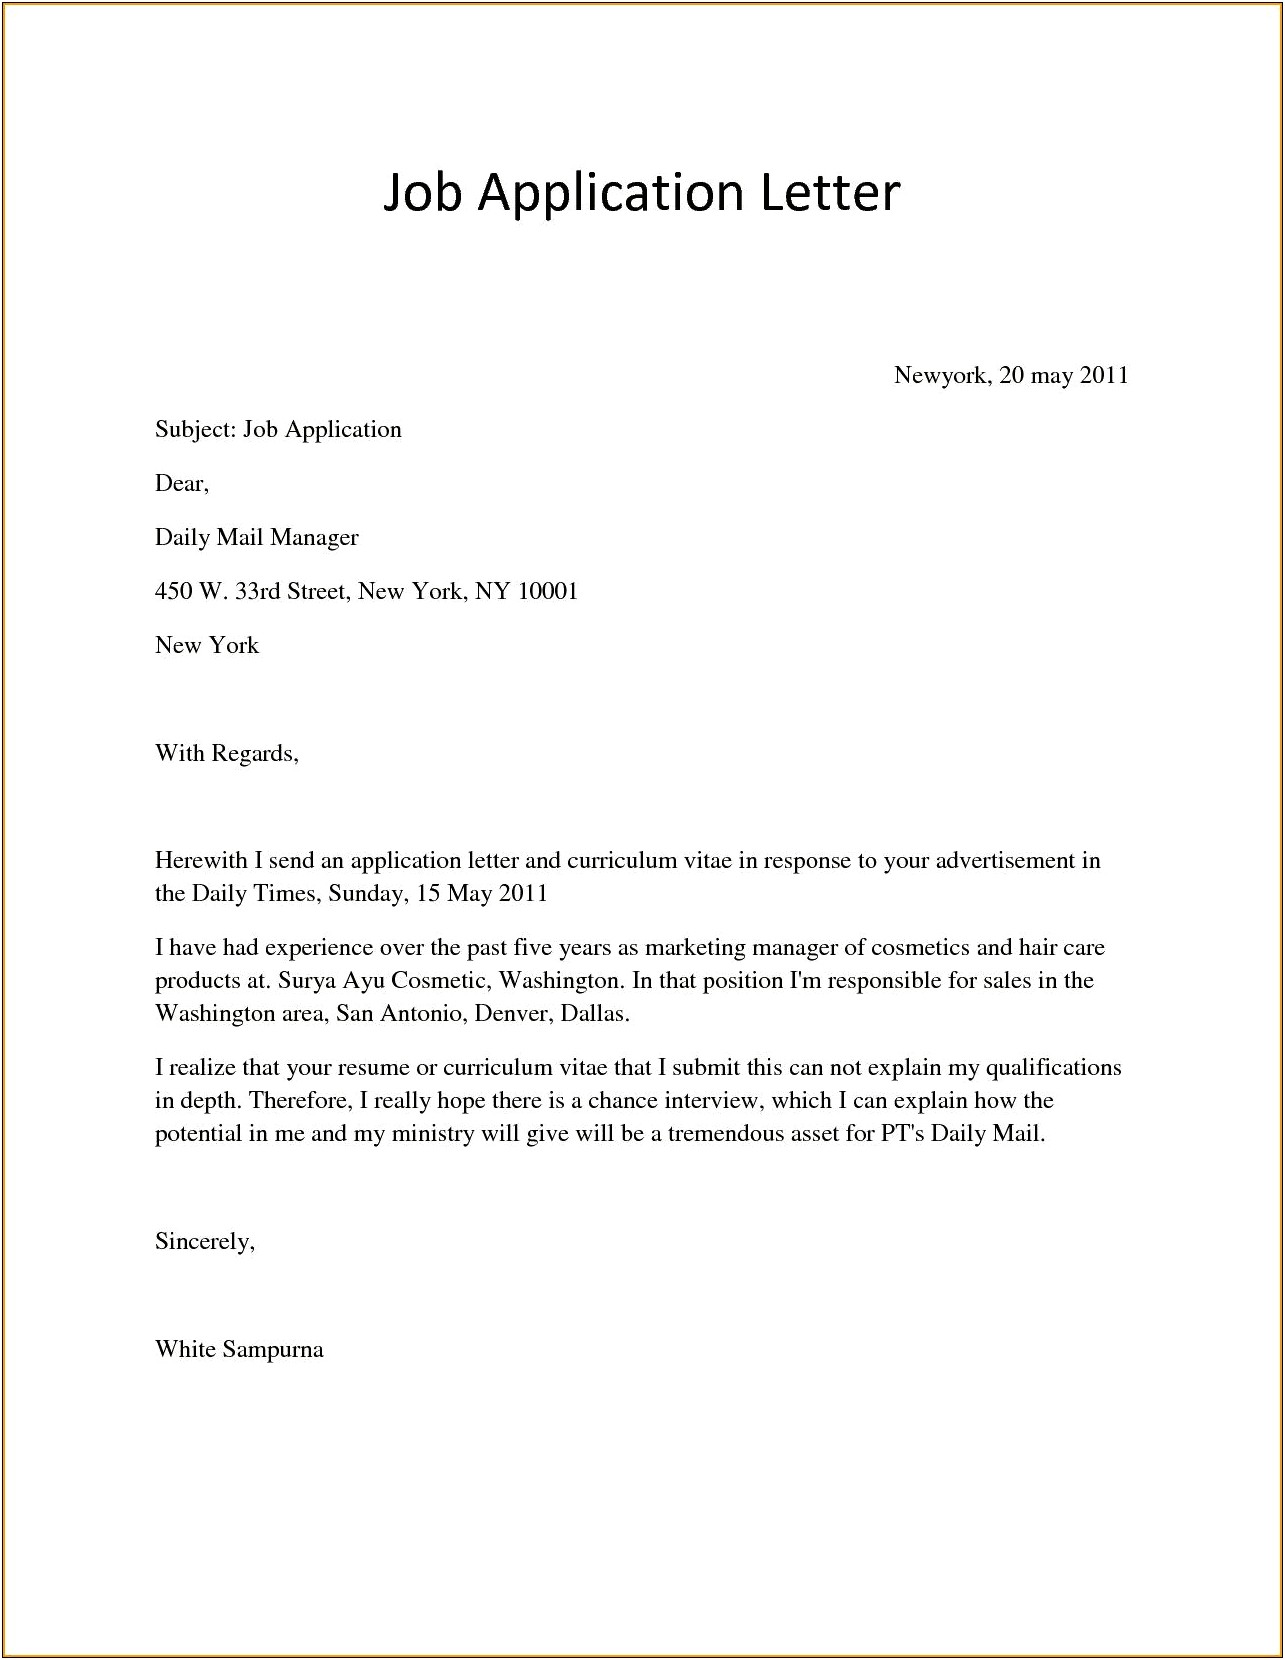 Job Application Letter Along With Resume